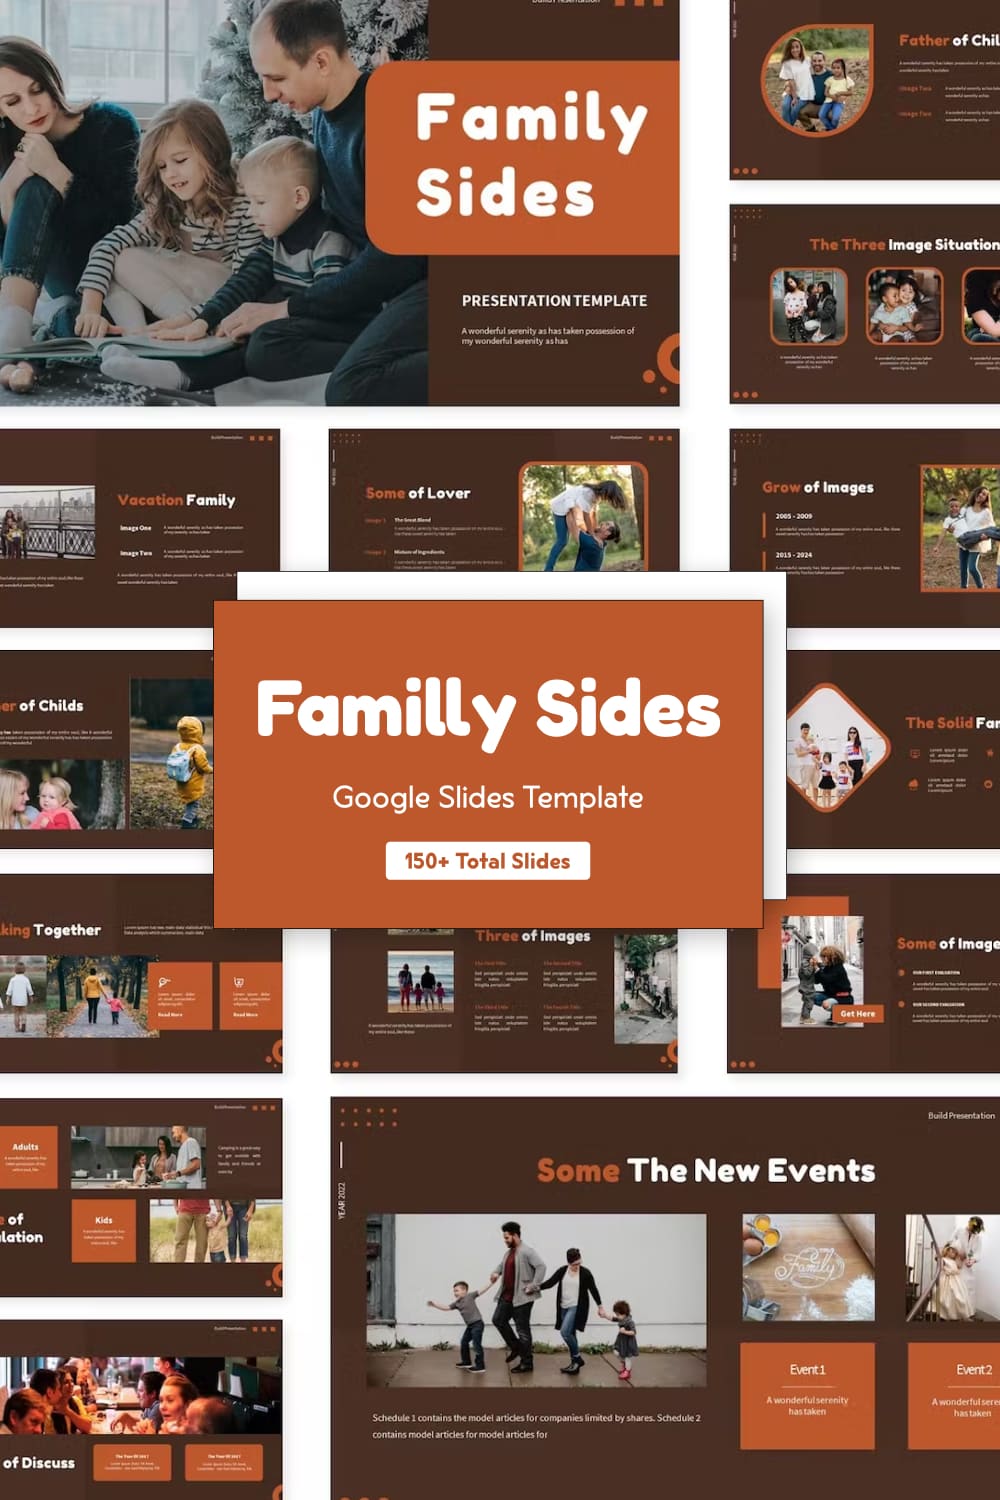 Family Pages | Google Slides Template - Pinterest.